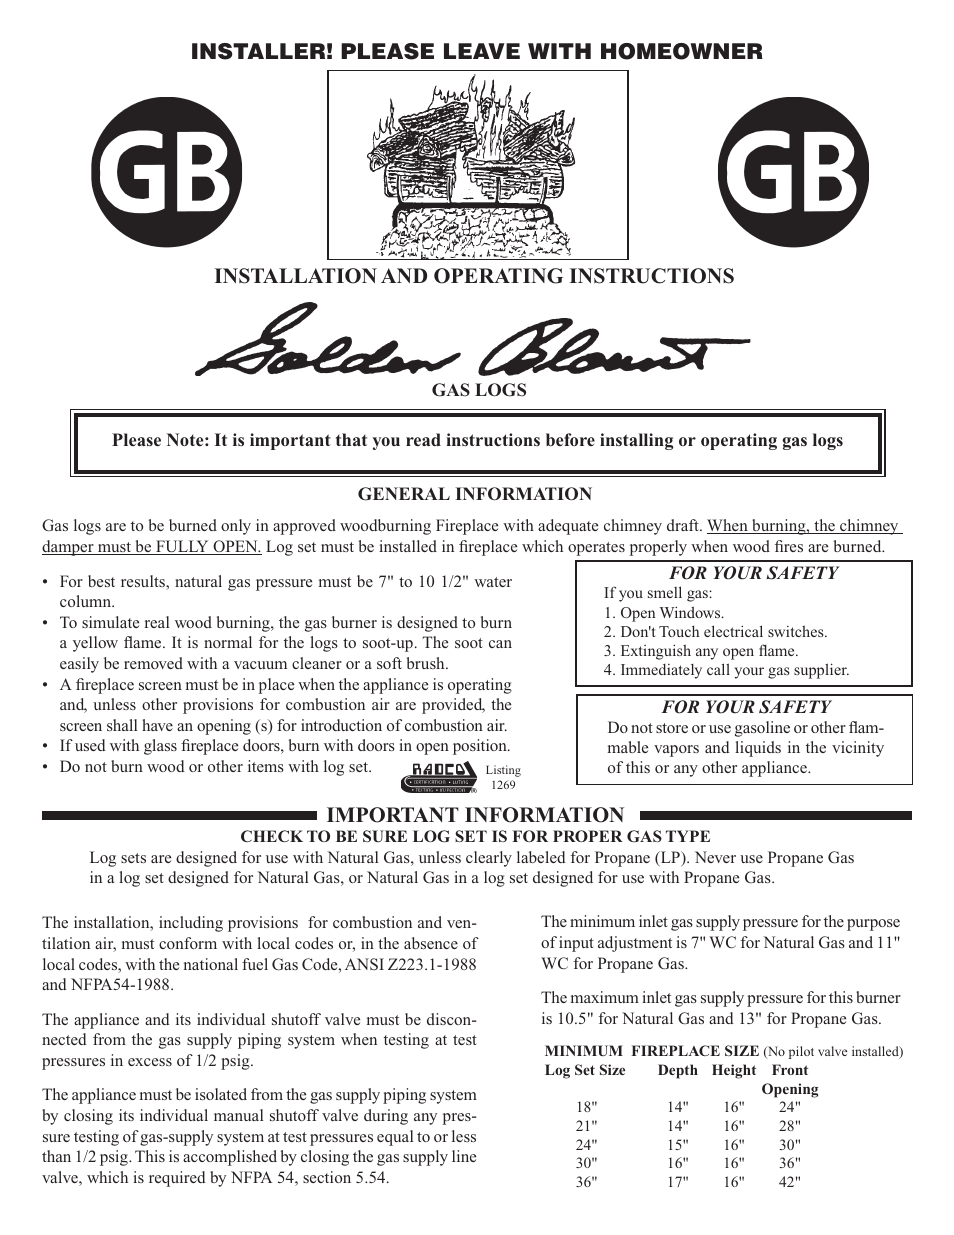 Golden Blount Radco User Manual | 4 pages